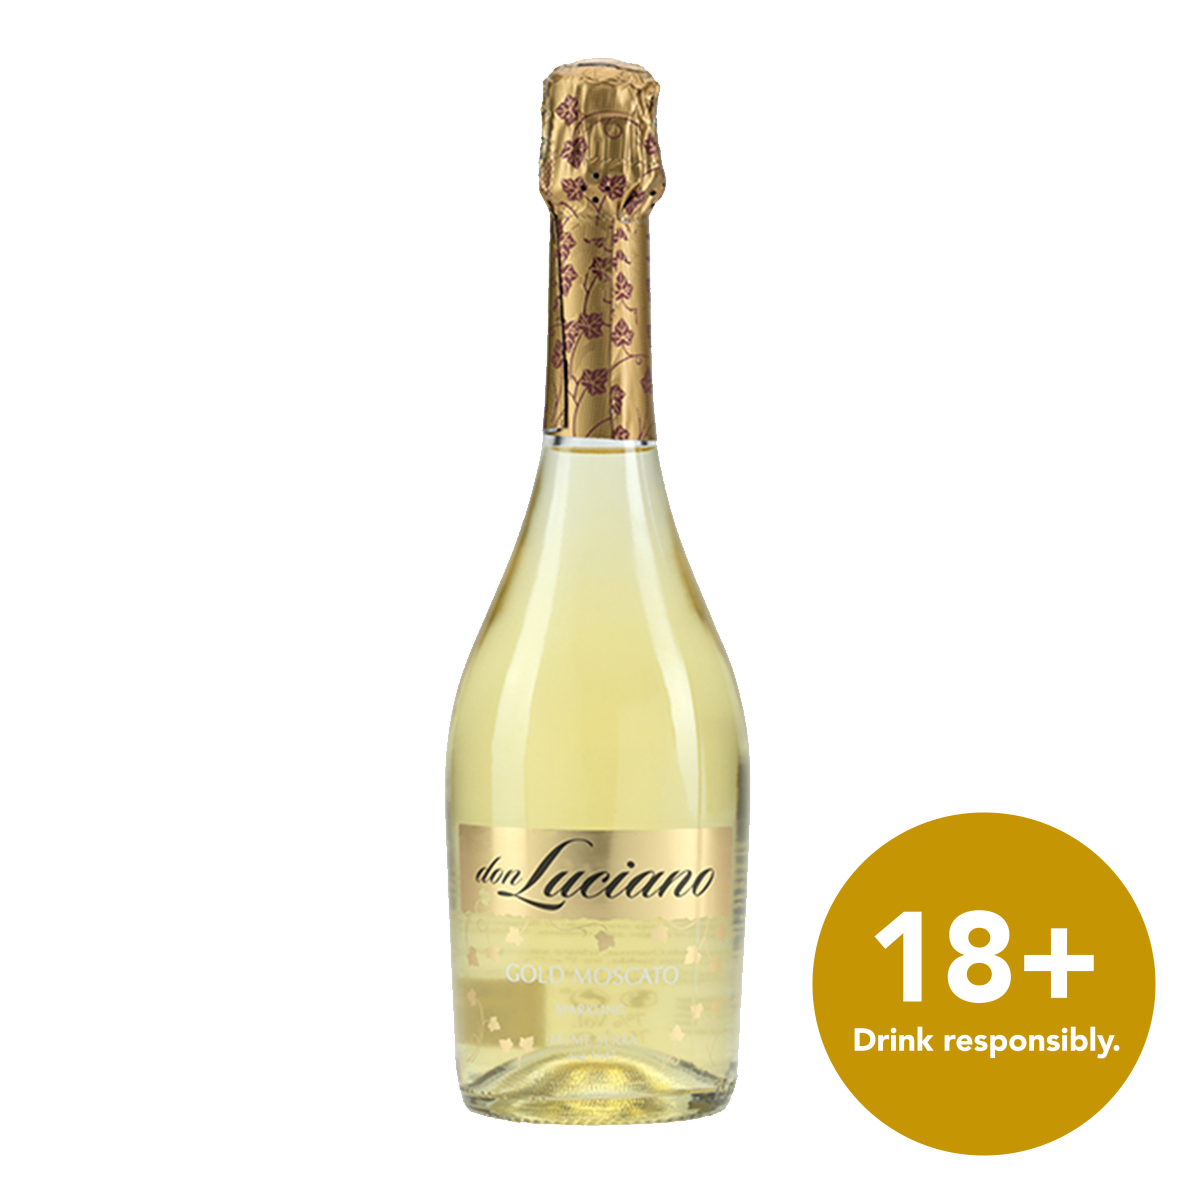 Don Luciano Gold Moscato (Sweet) – The Espa-fil Market